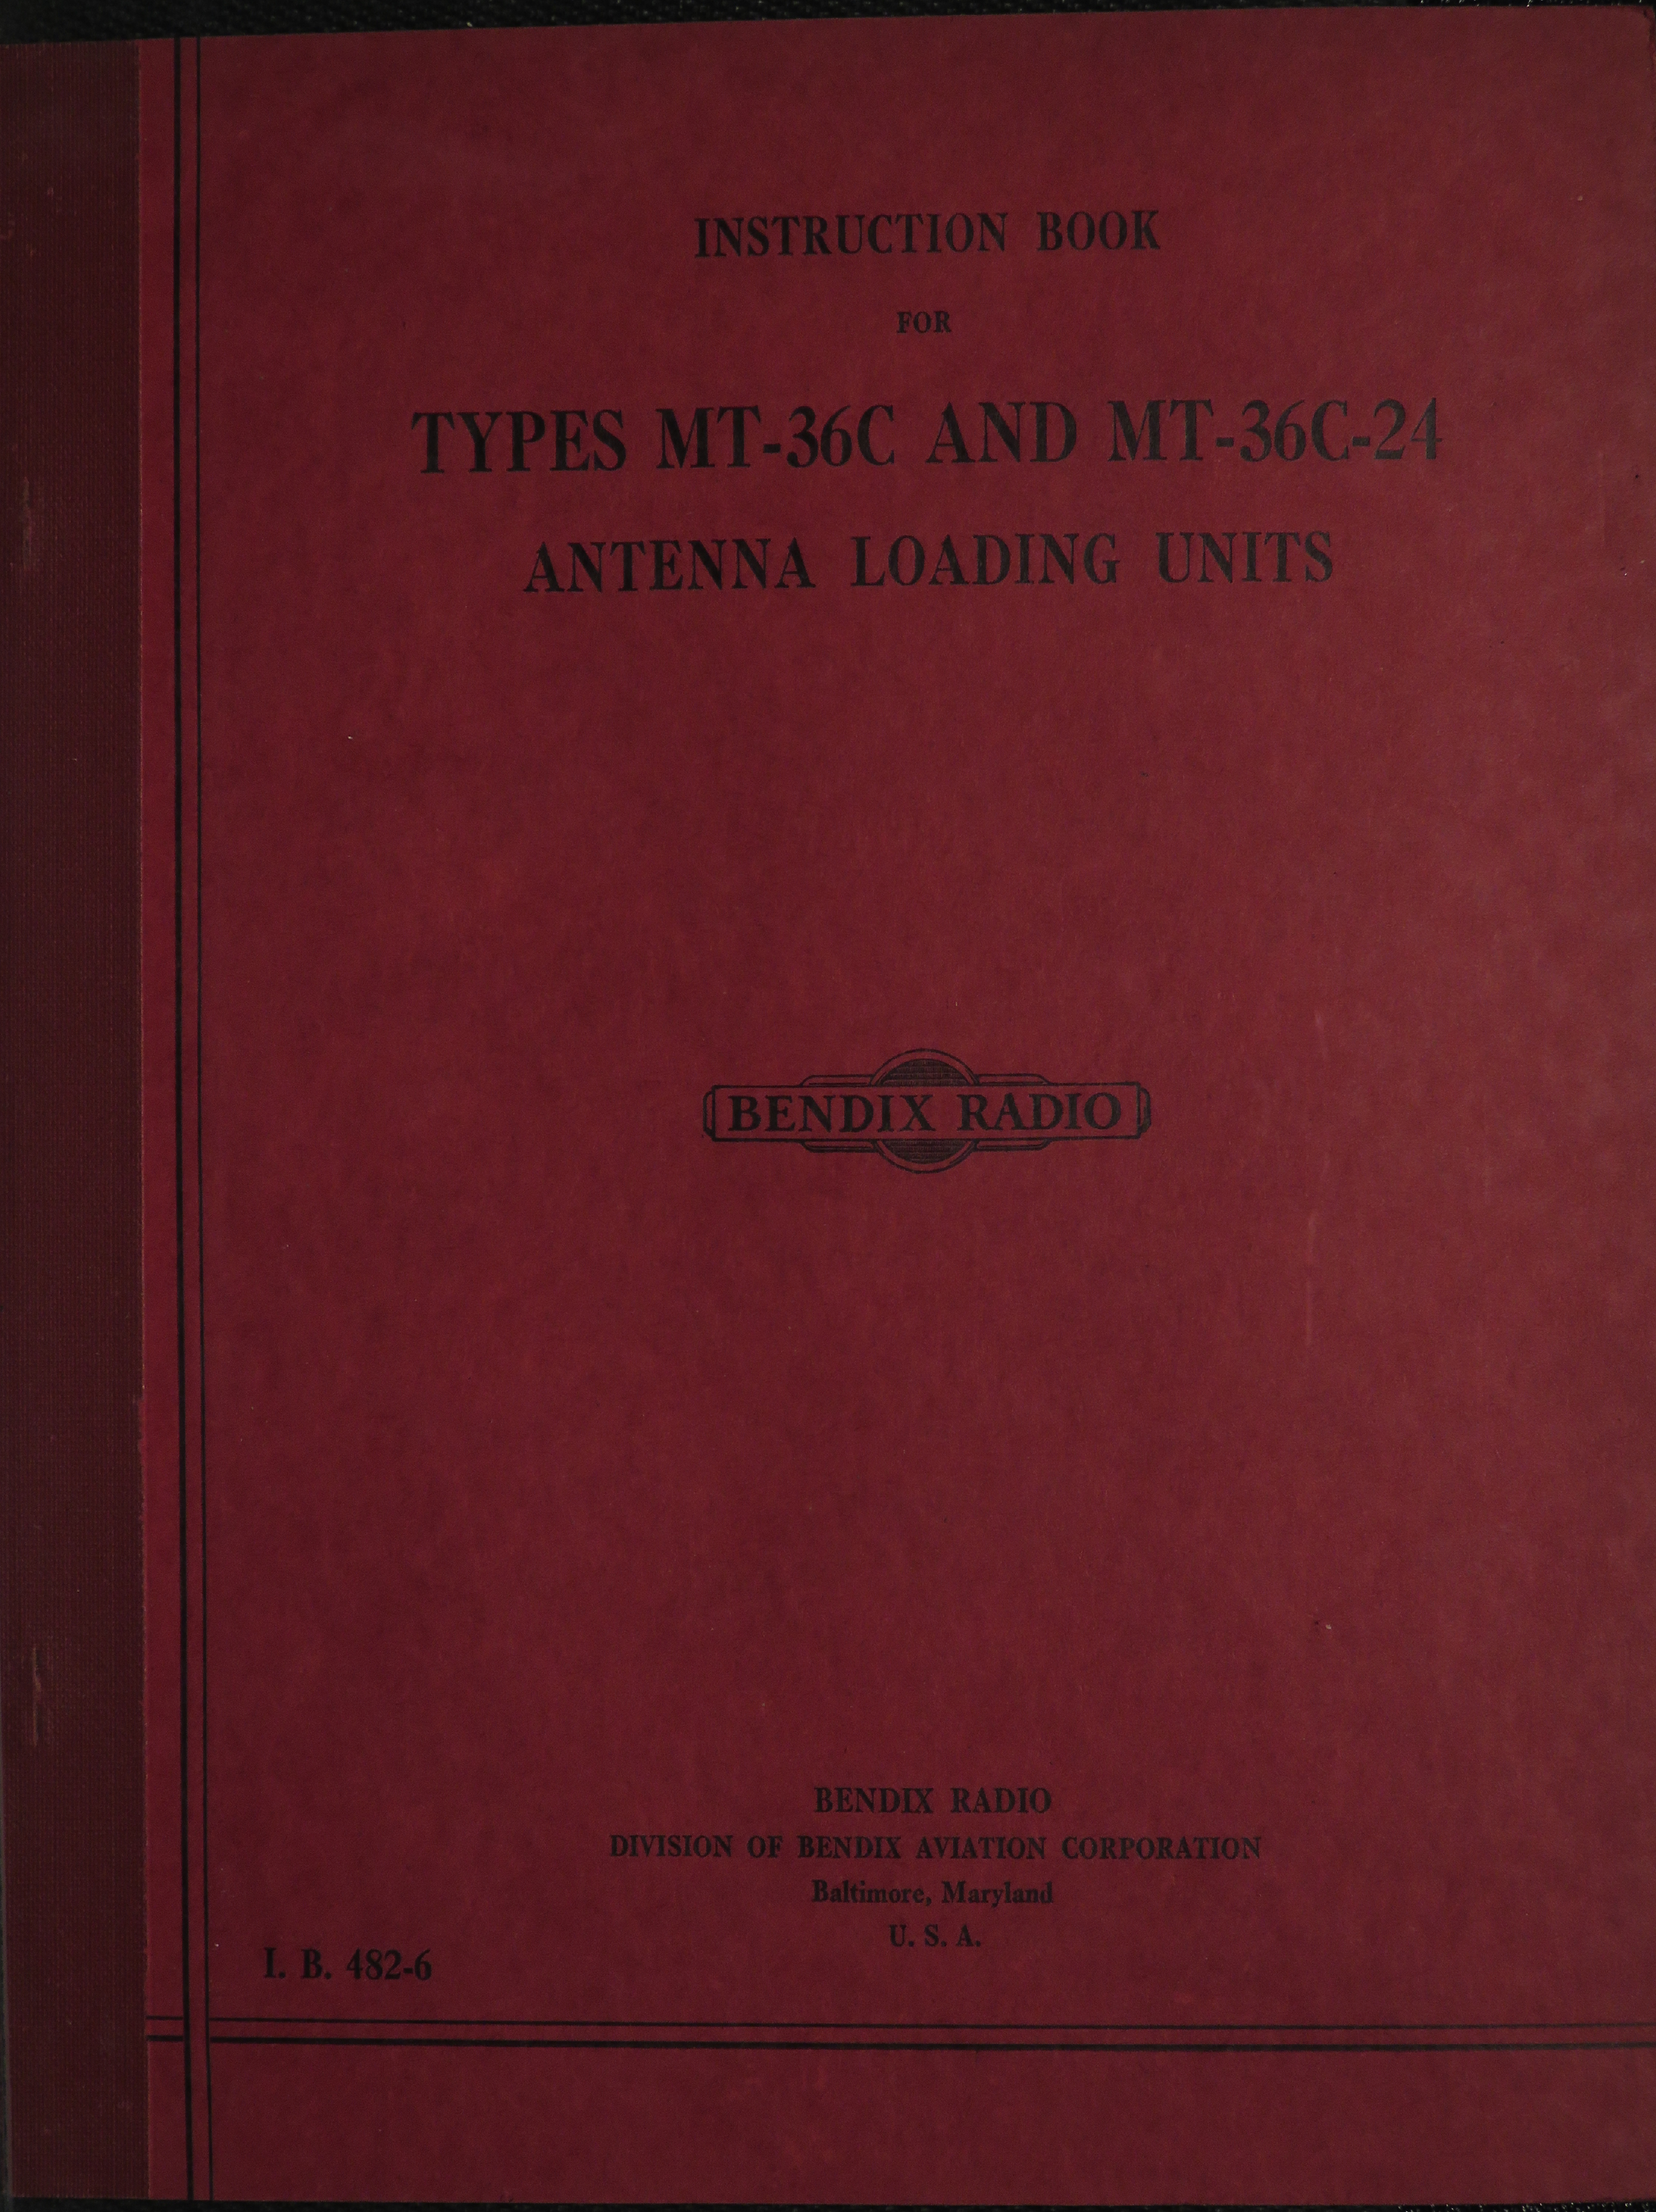 Sample page 1 from AirCorps Library document: Instruction Book for Types MT-36C and MT-36C-24 Antenna Loading Units